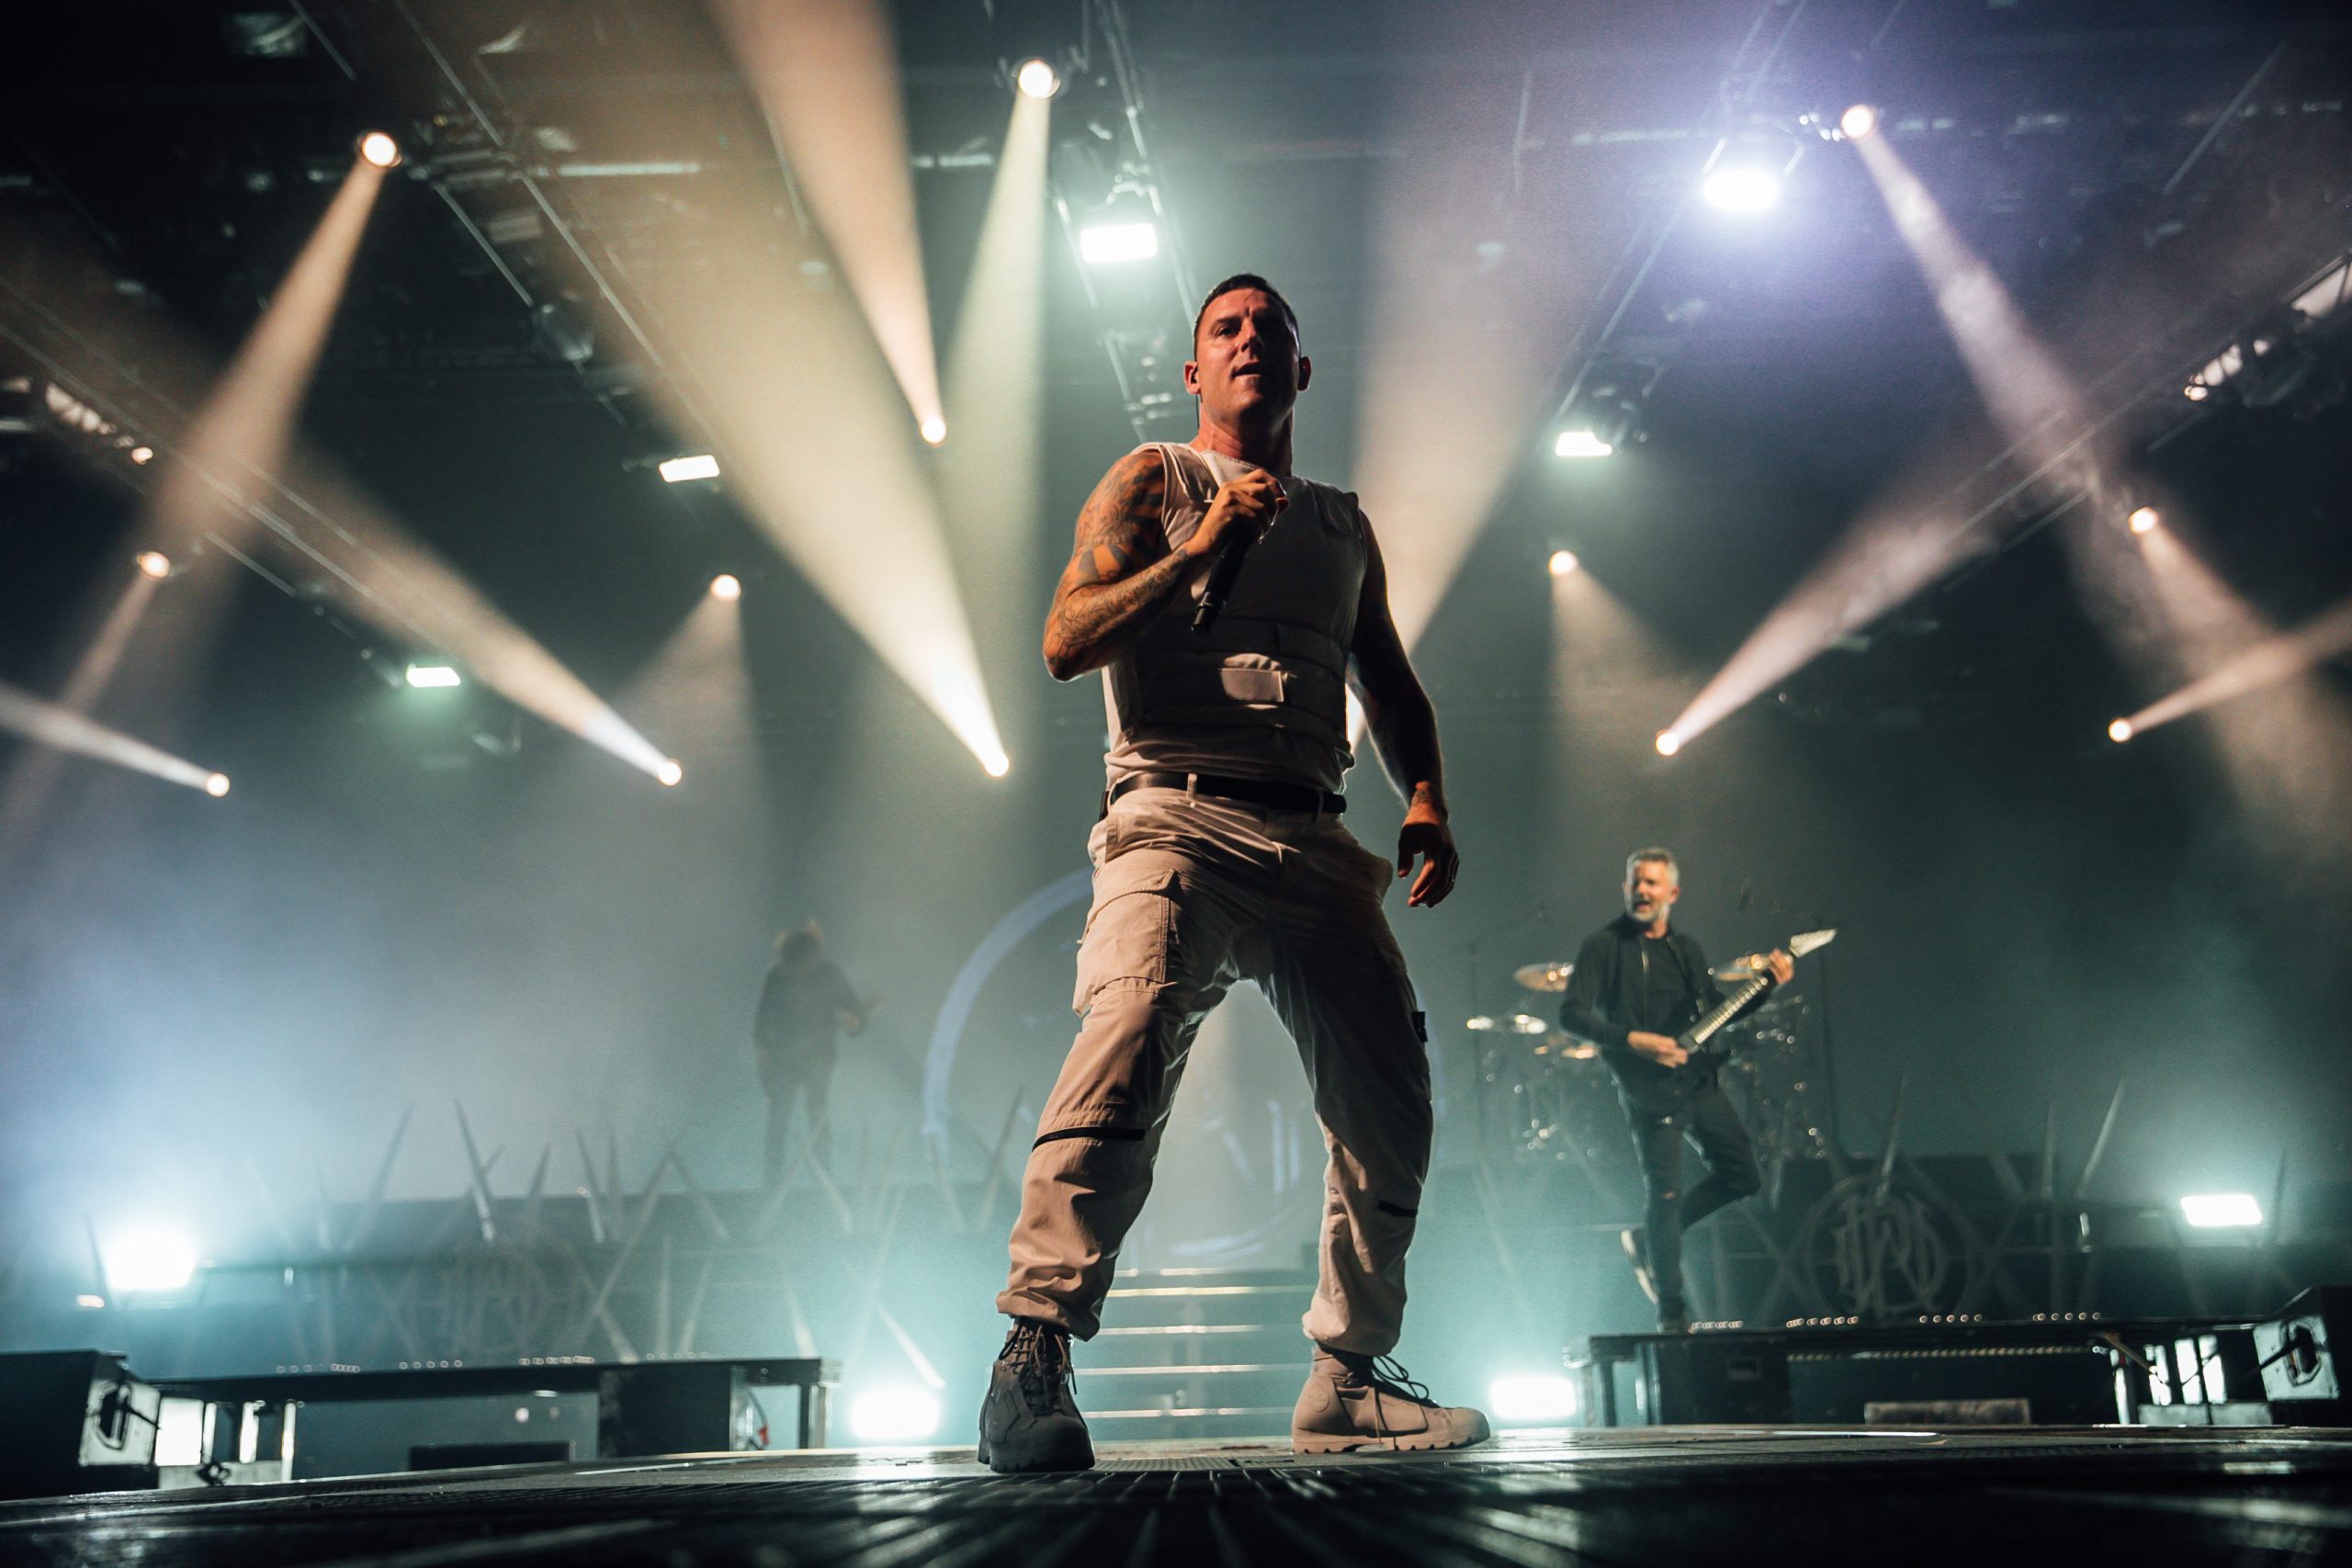 Parkway Drive's Winston McCall on How 'Music Transcends Language'